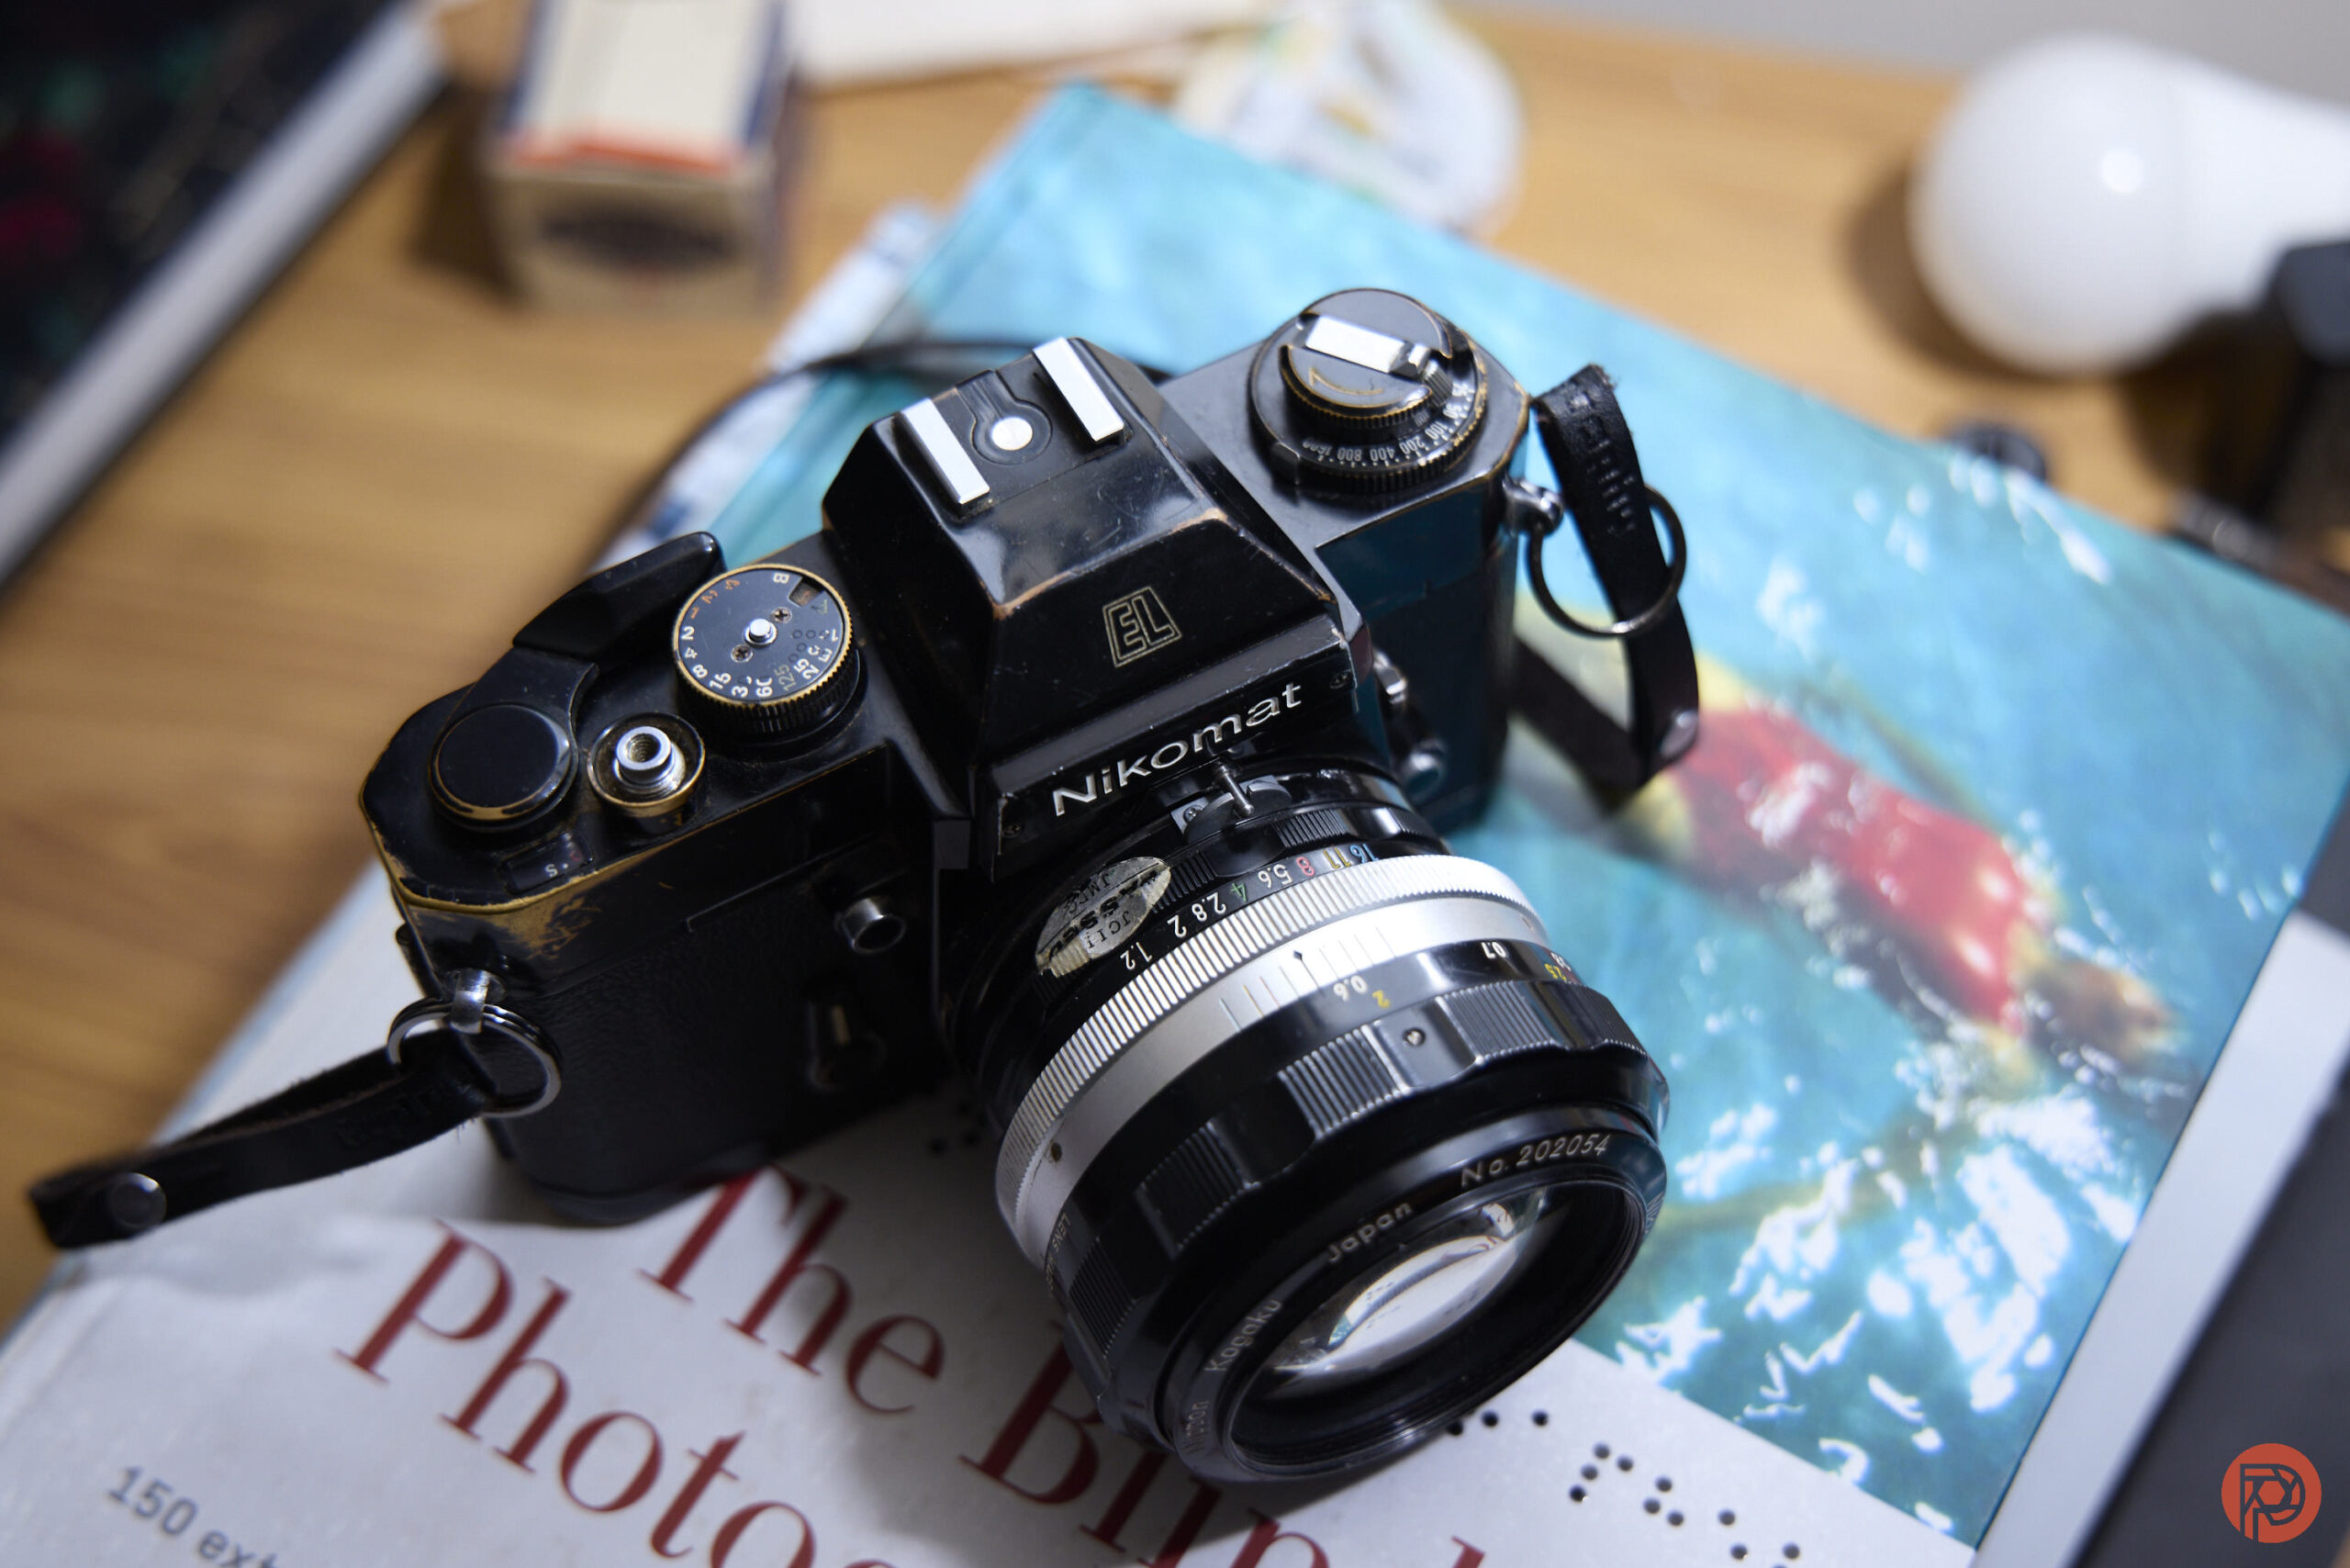 Chris Gampat The Phoblographer Nikkormat ELreview product images 41-50s800 1